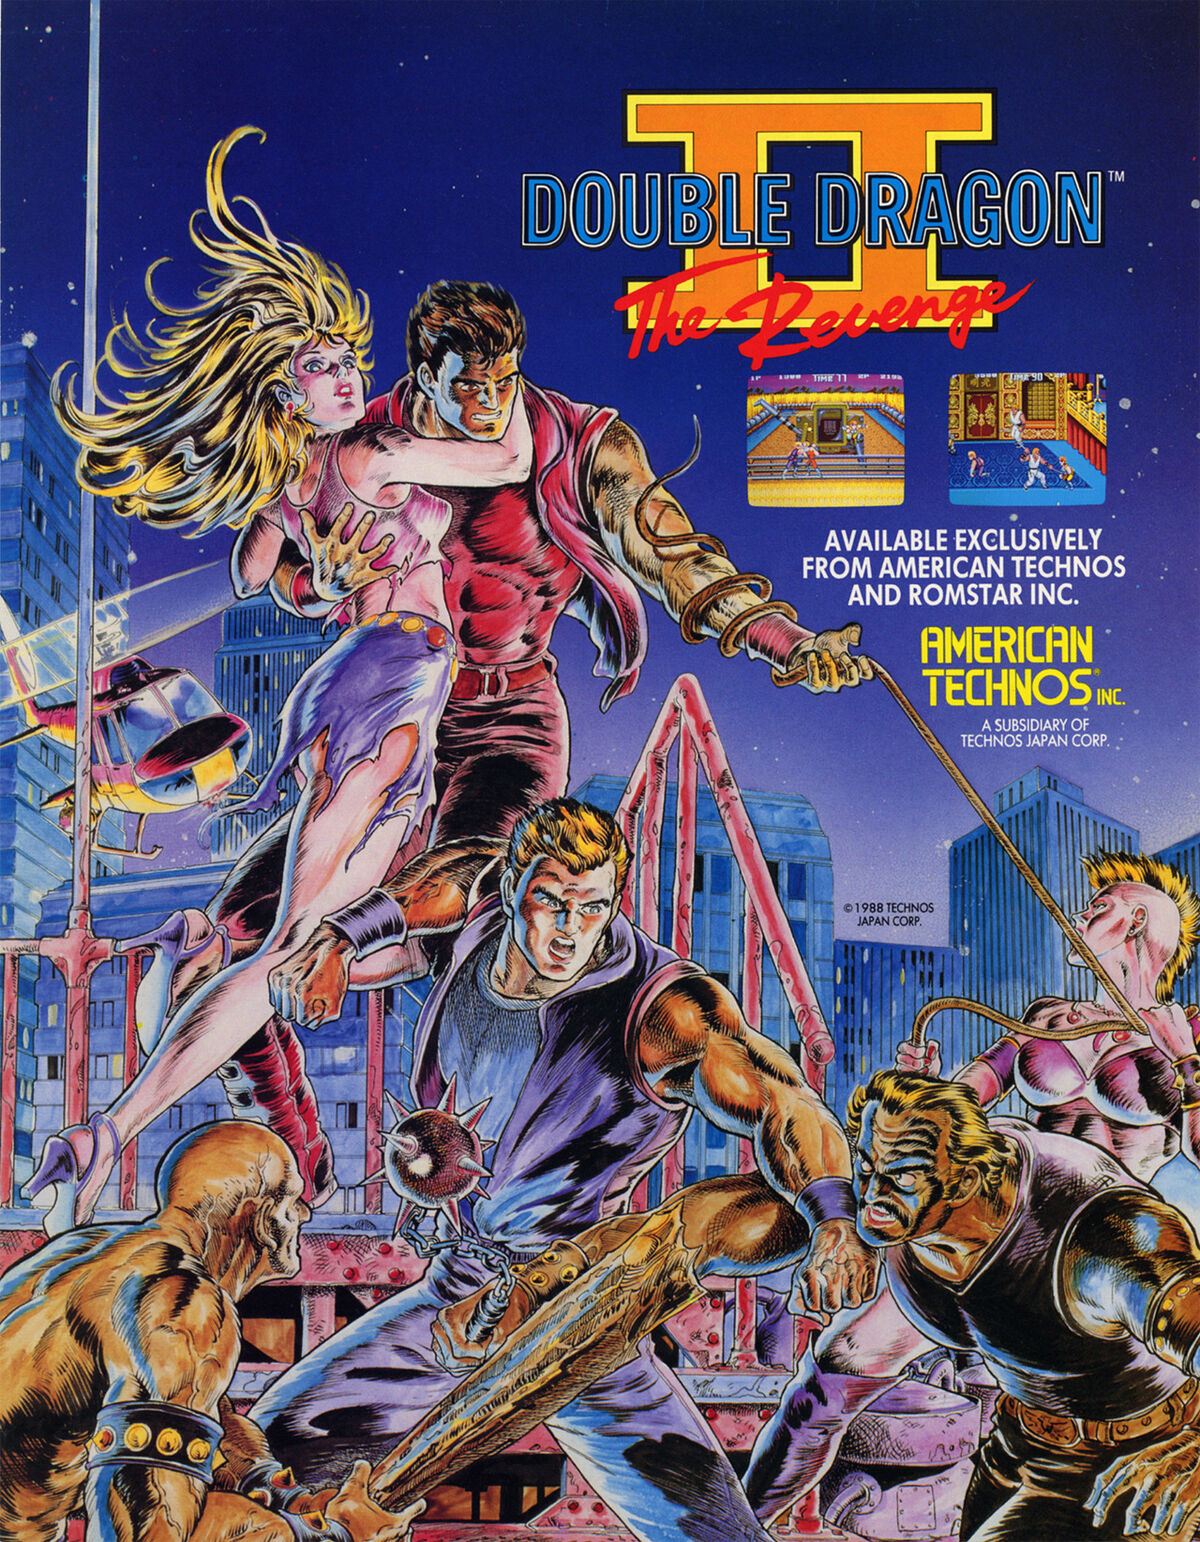 Super Double Dragon - The Cutting Room Floor